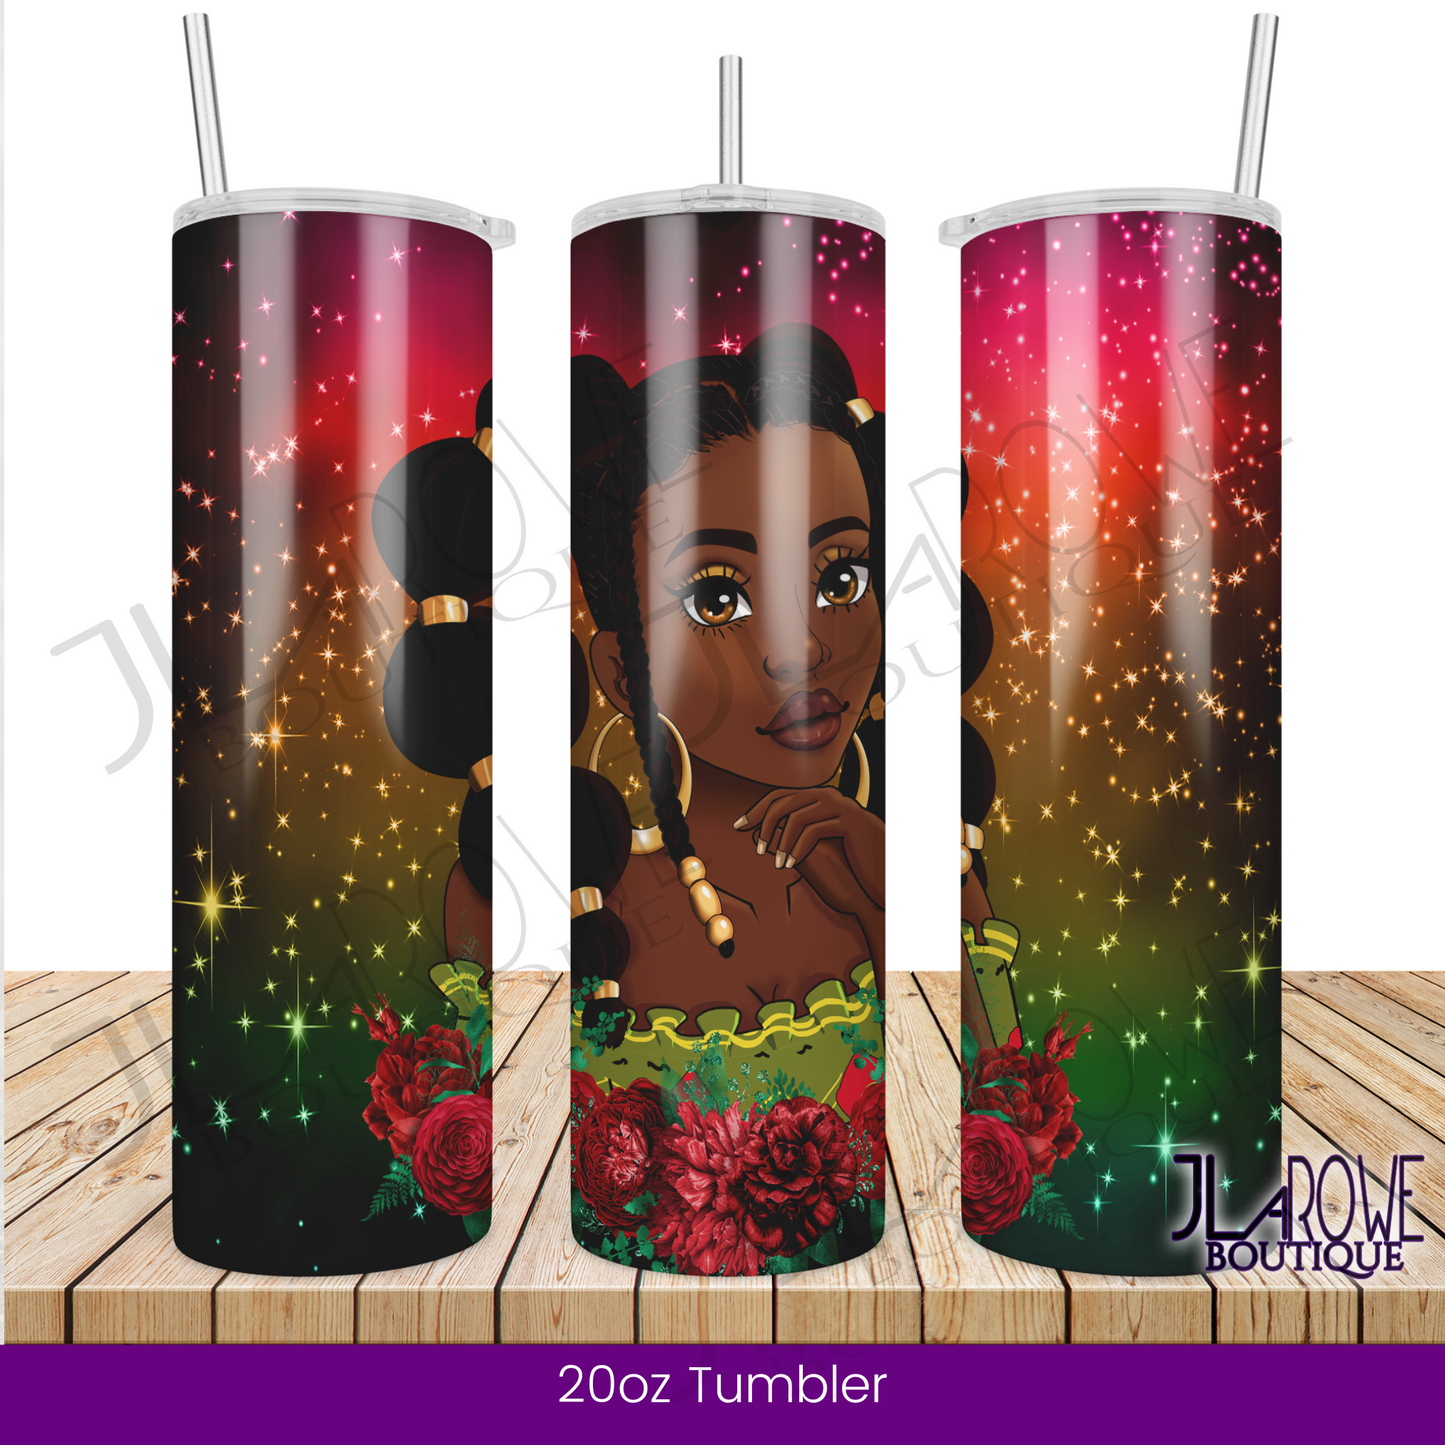 African American Teen, Black princess with pony tails and roses - 20oz Tumbler